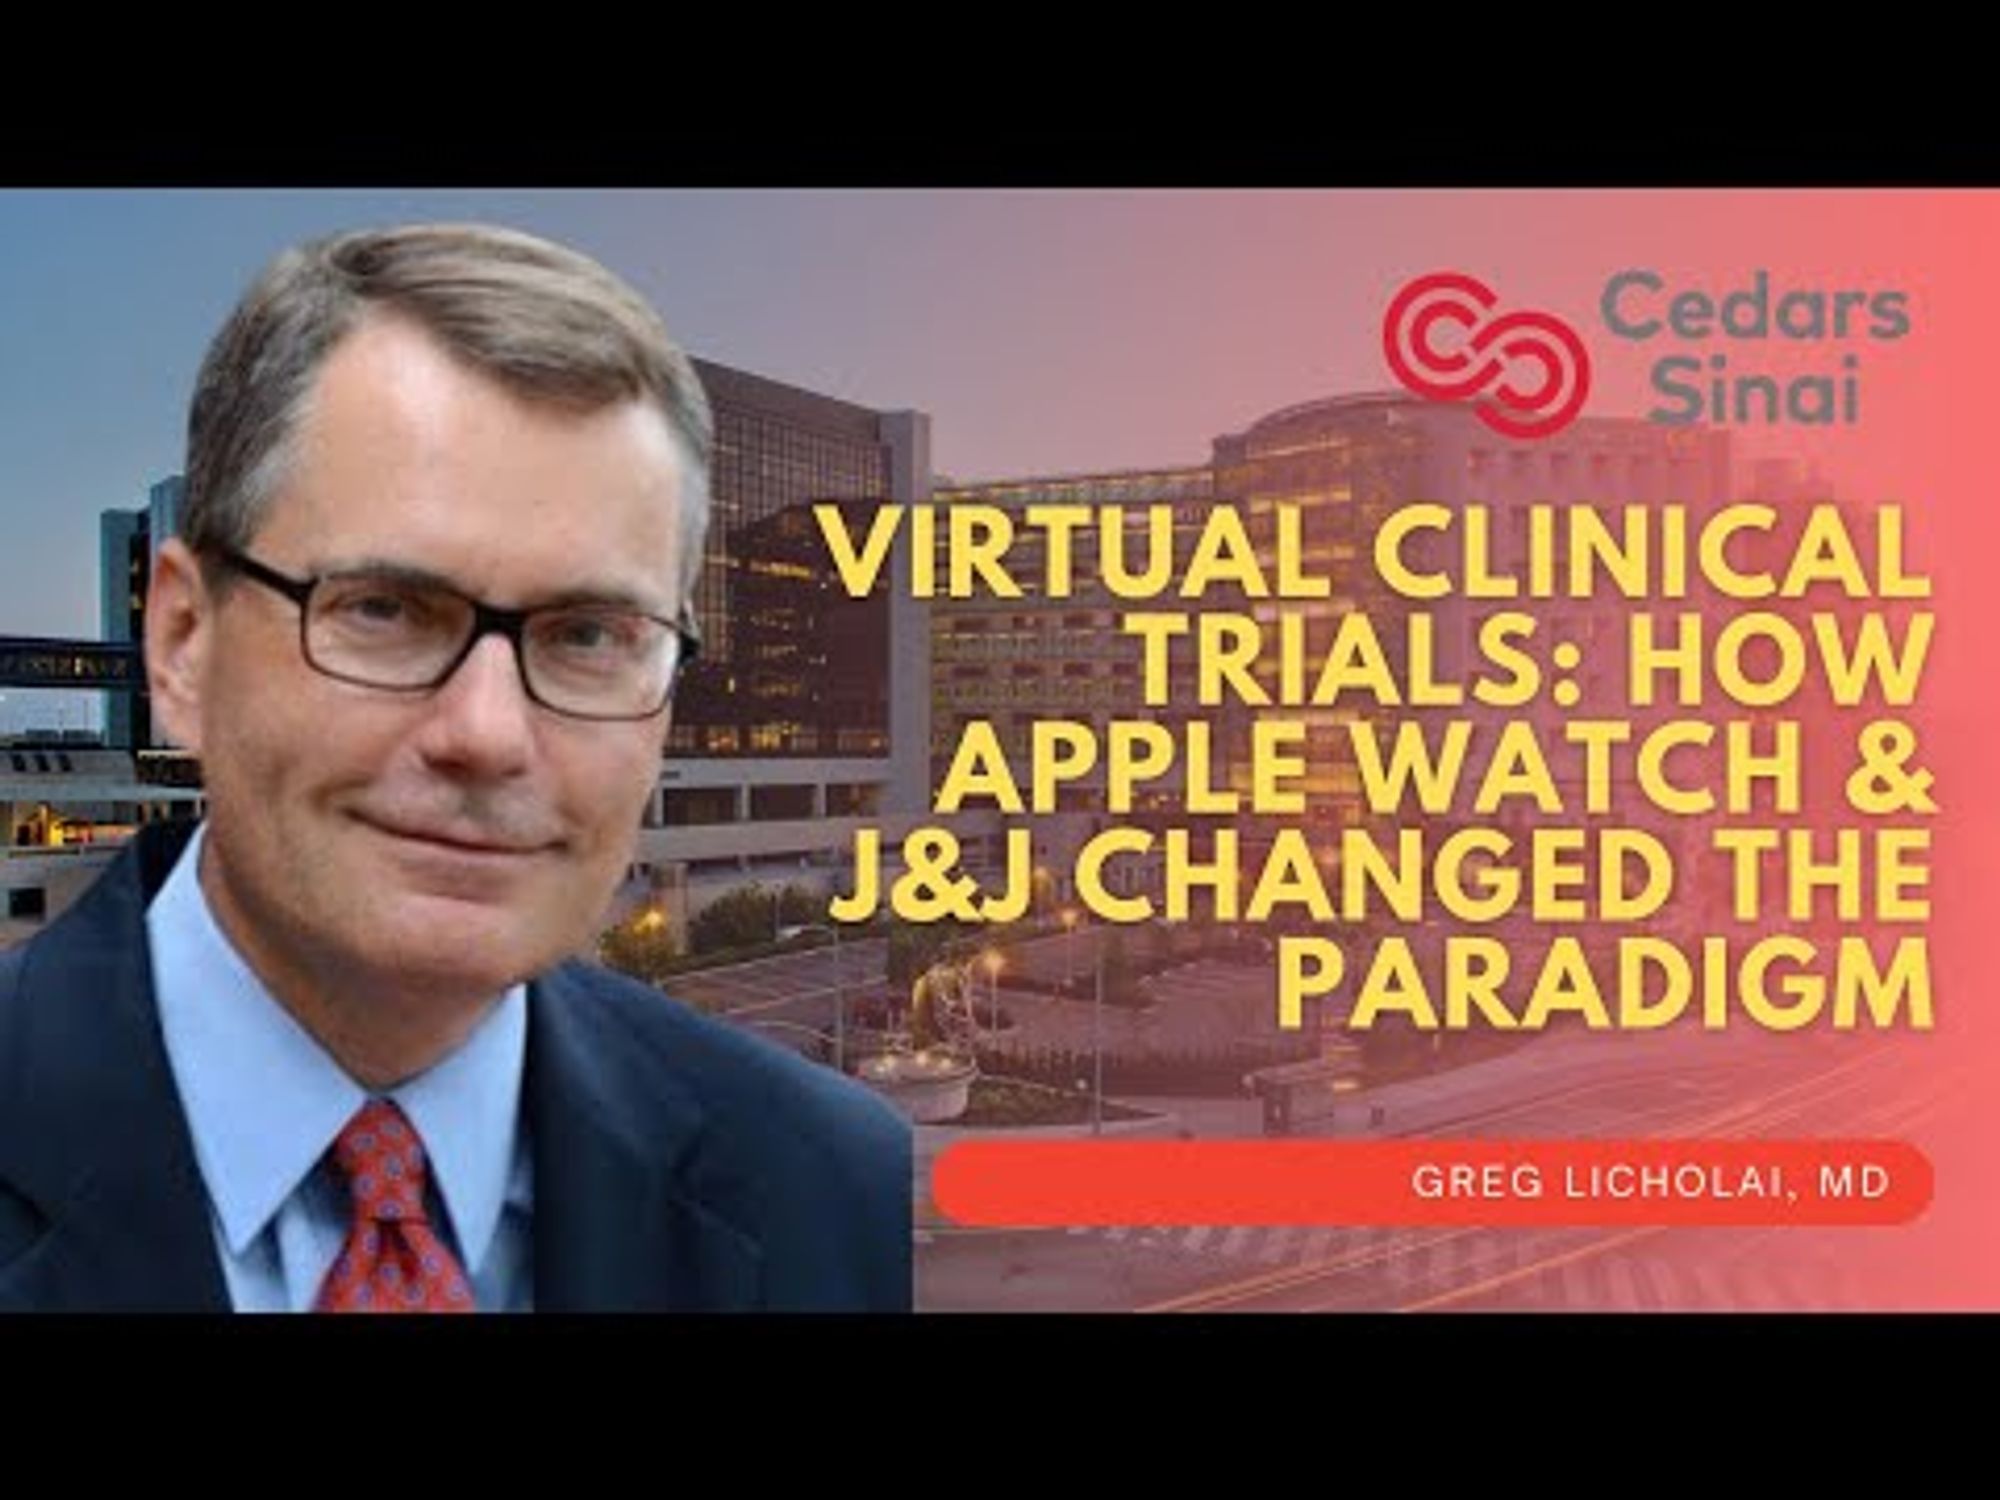 Virtual Clinical Trials How Apple Watch & J&J Changed the Paradigm - Greg Licholai, MD